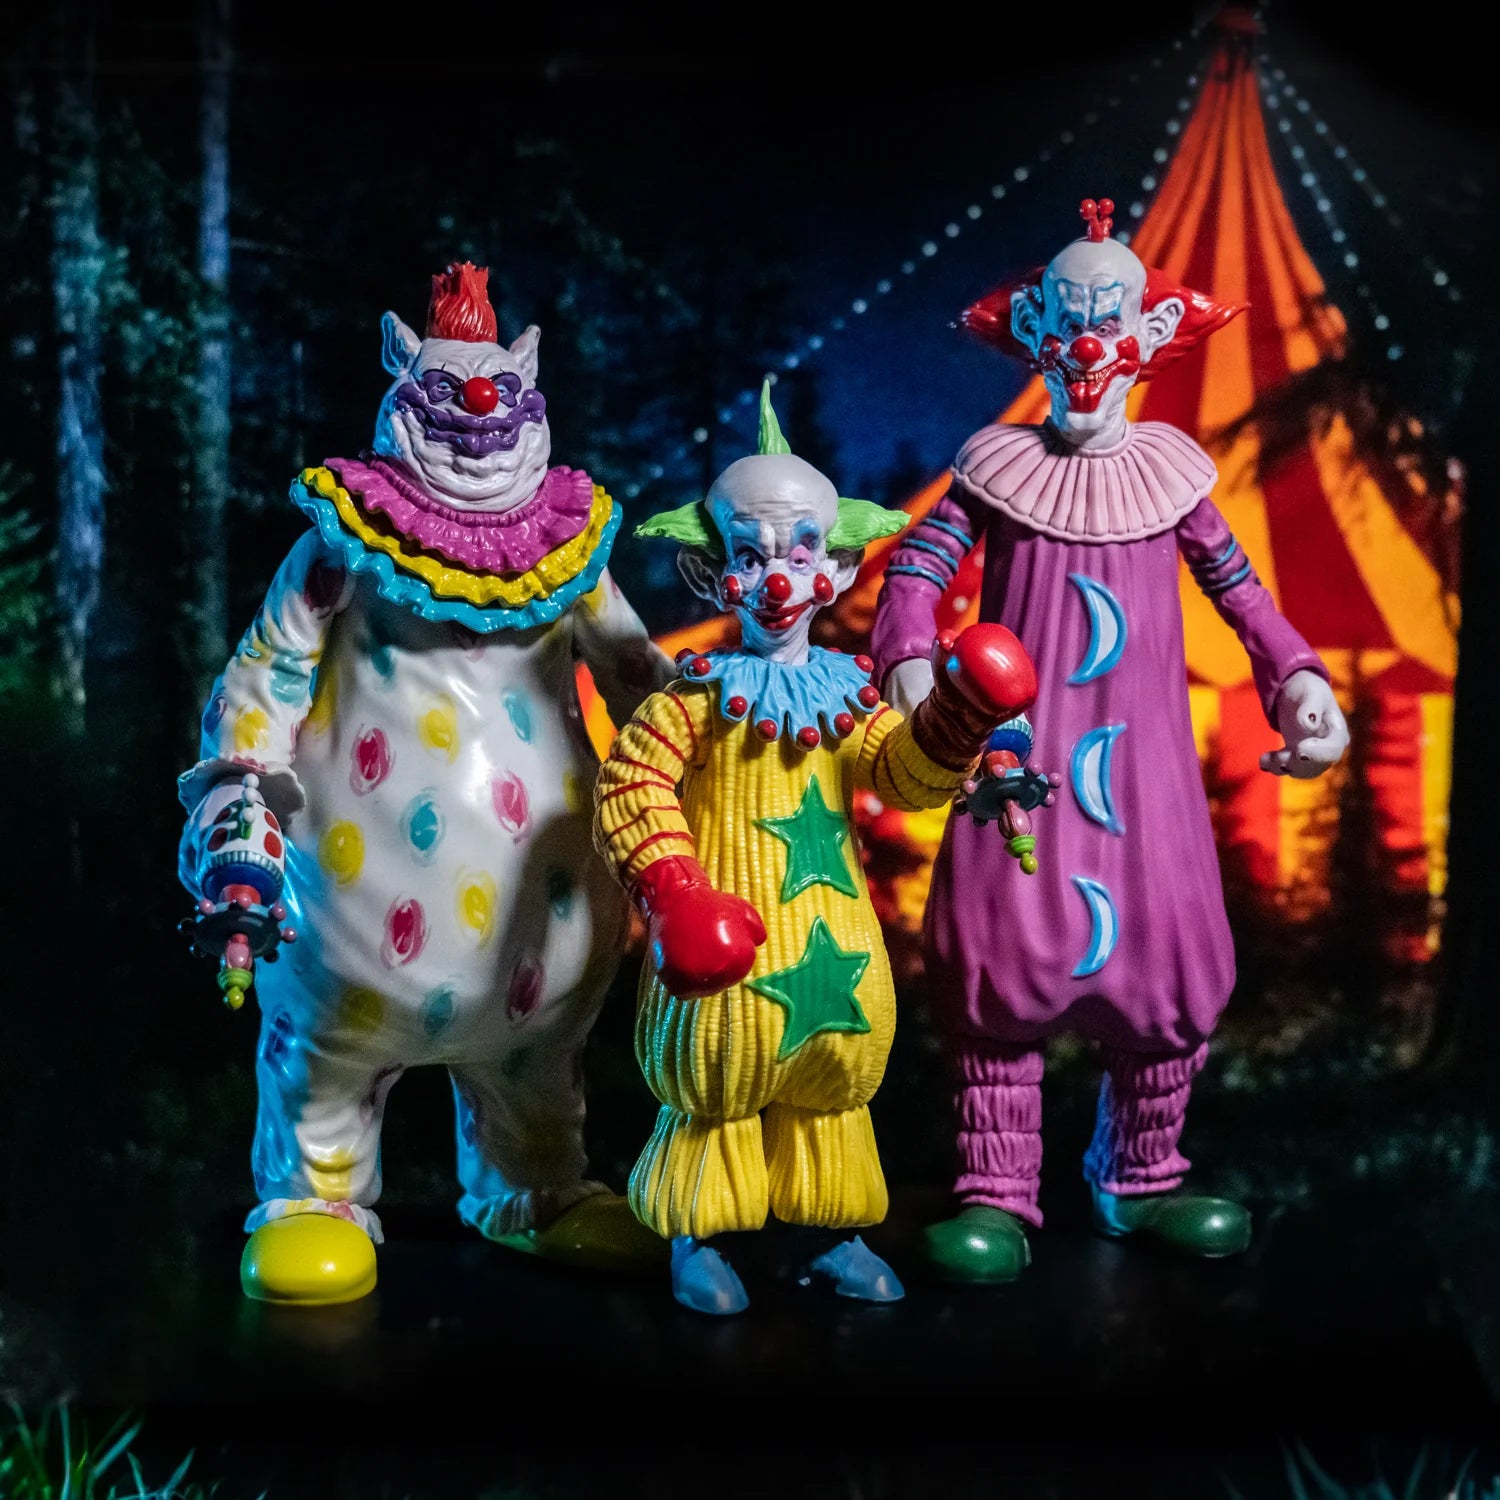 Killer Klowns from Outer Space action figures